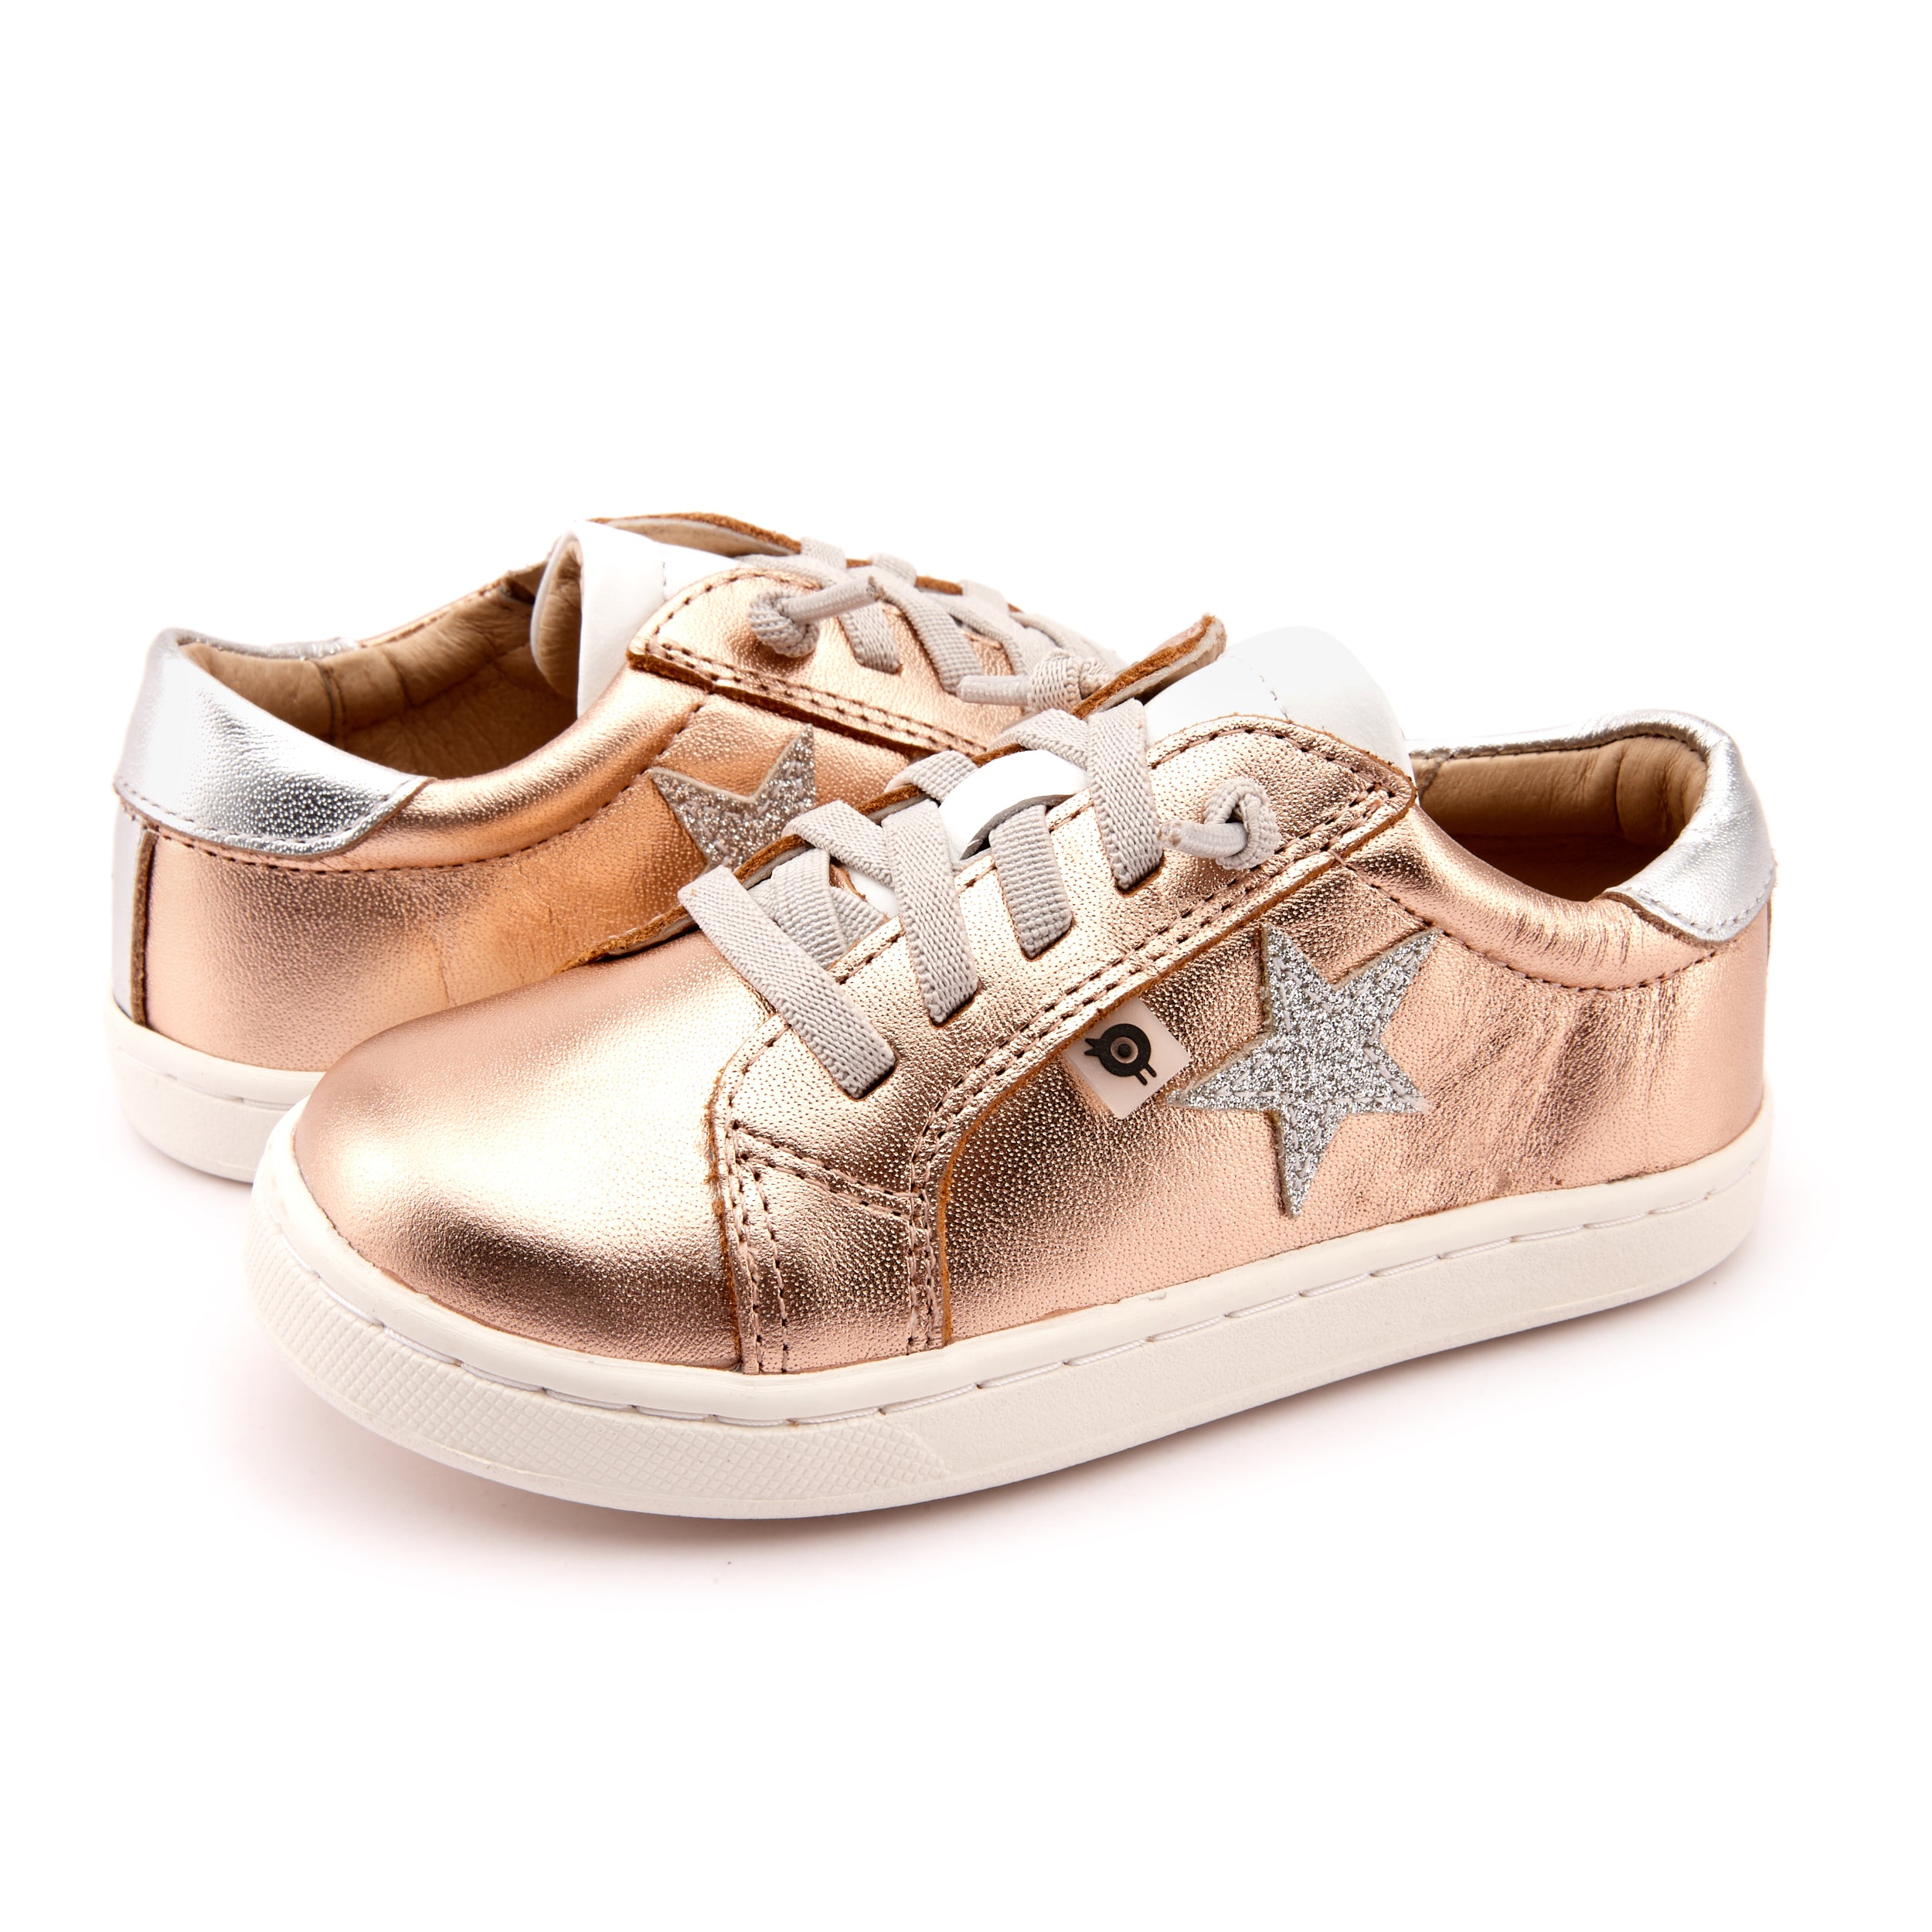 Old Soles Girl's Milky Way Sneakers Copper/Silver/Snow/Glam Argent – Just Shoes for Kids